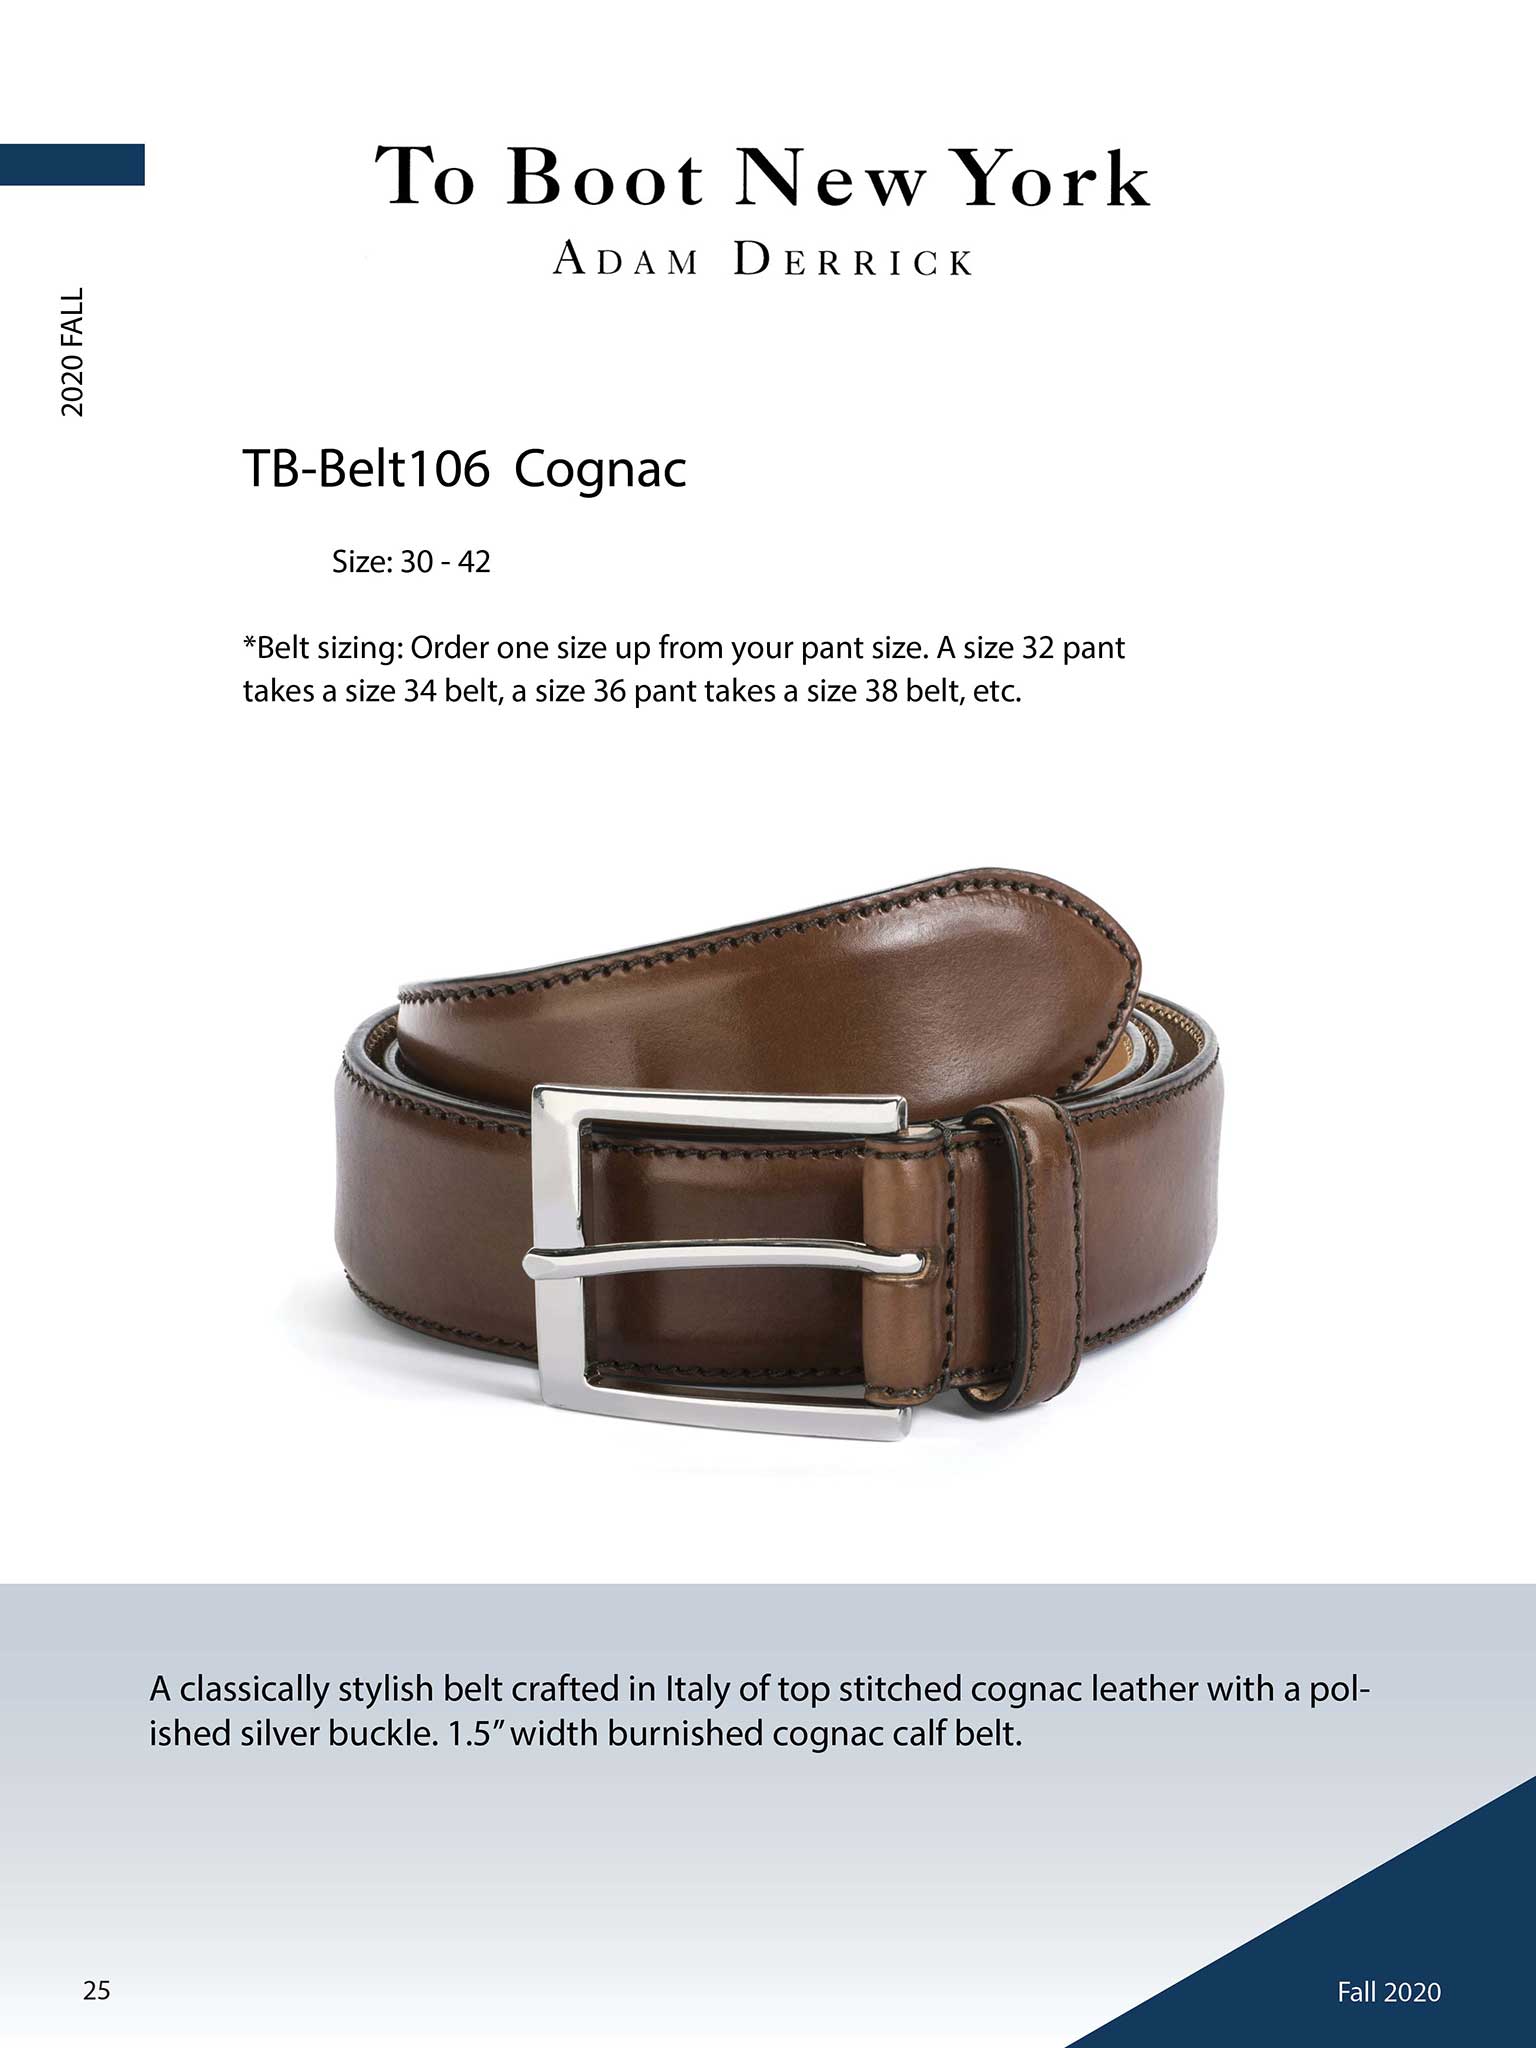 Congnac Belt by To Boot New York